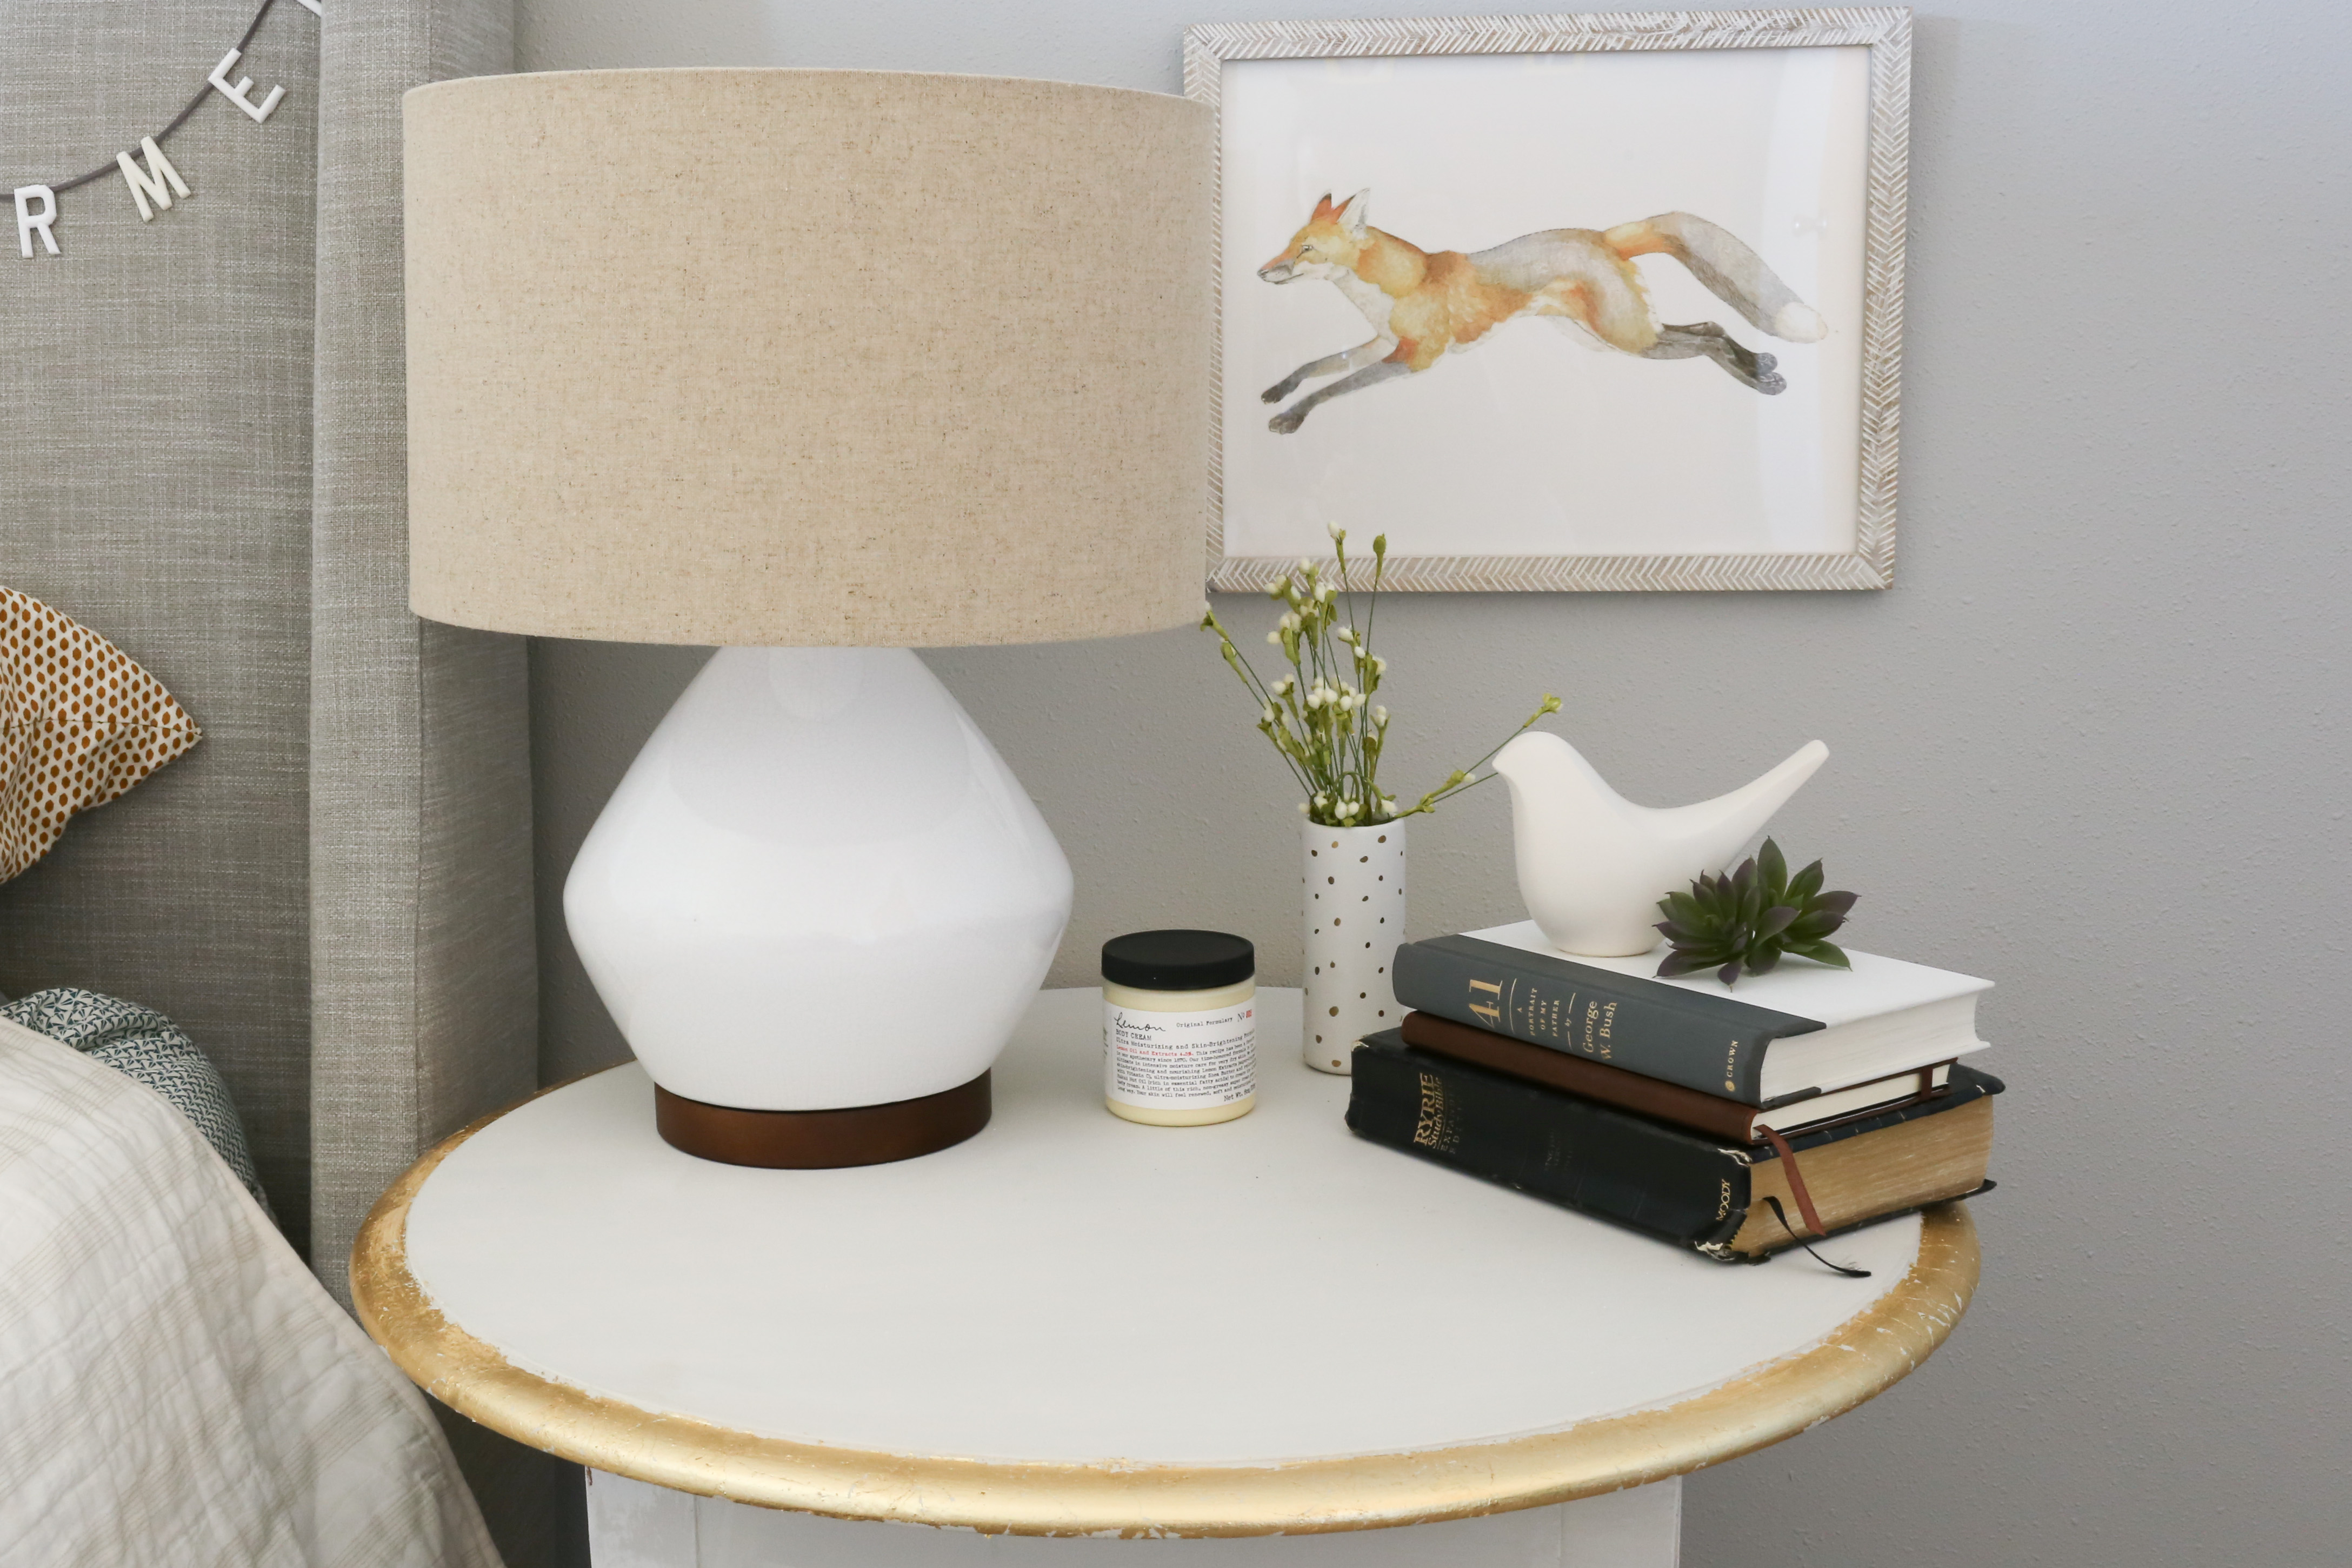 Styling the Nightstand